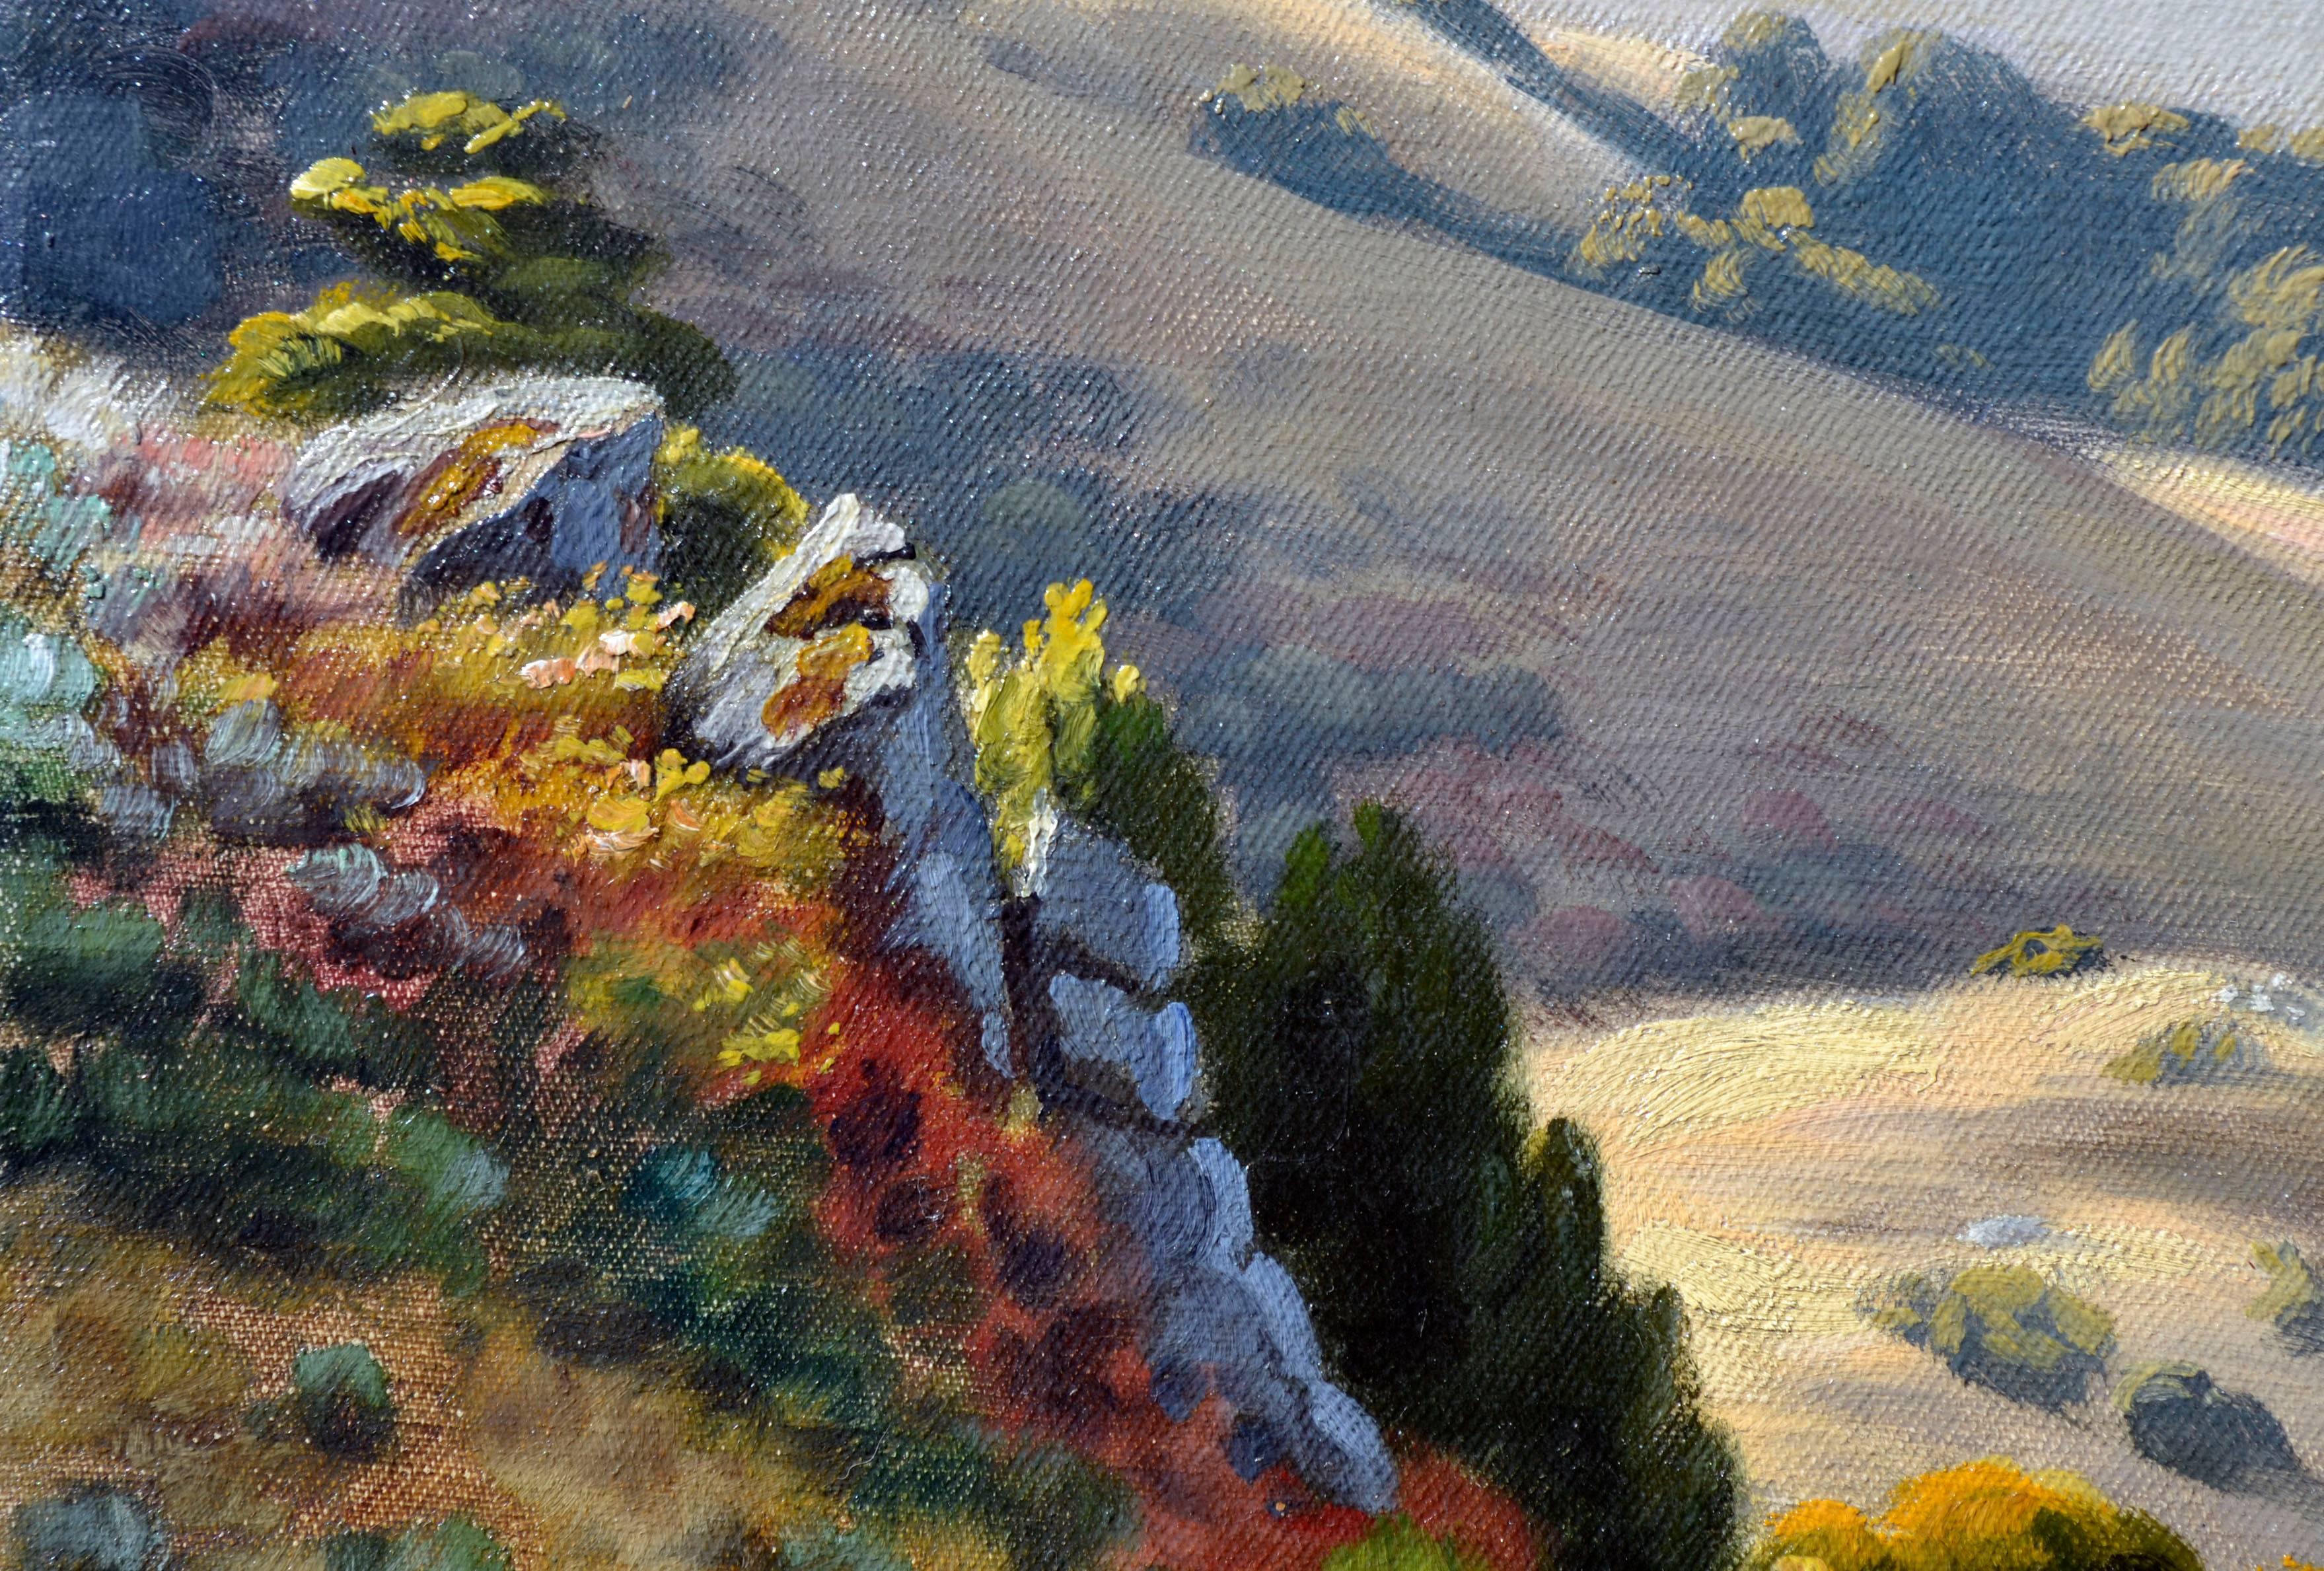 Mt. Tamalpais and the Marin Hills with Cows, Ludmilla Welch 1898 - American Impressionist Painting by Ludmilla Pilat Welch